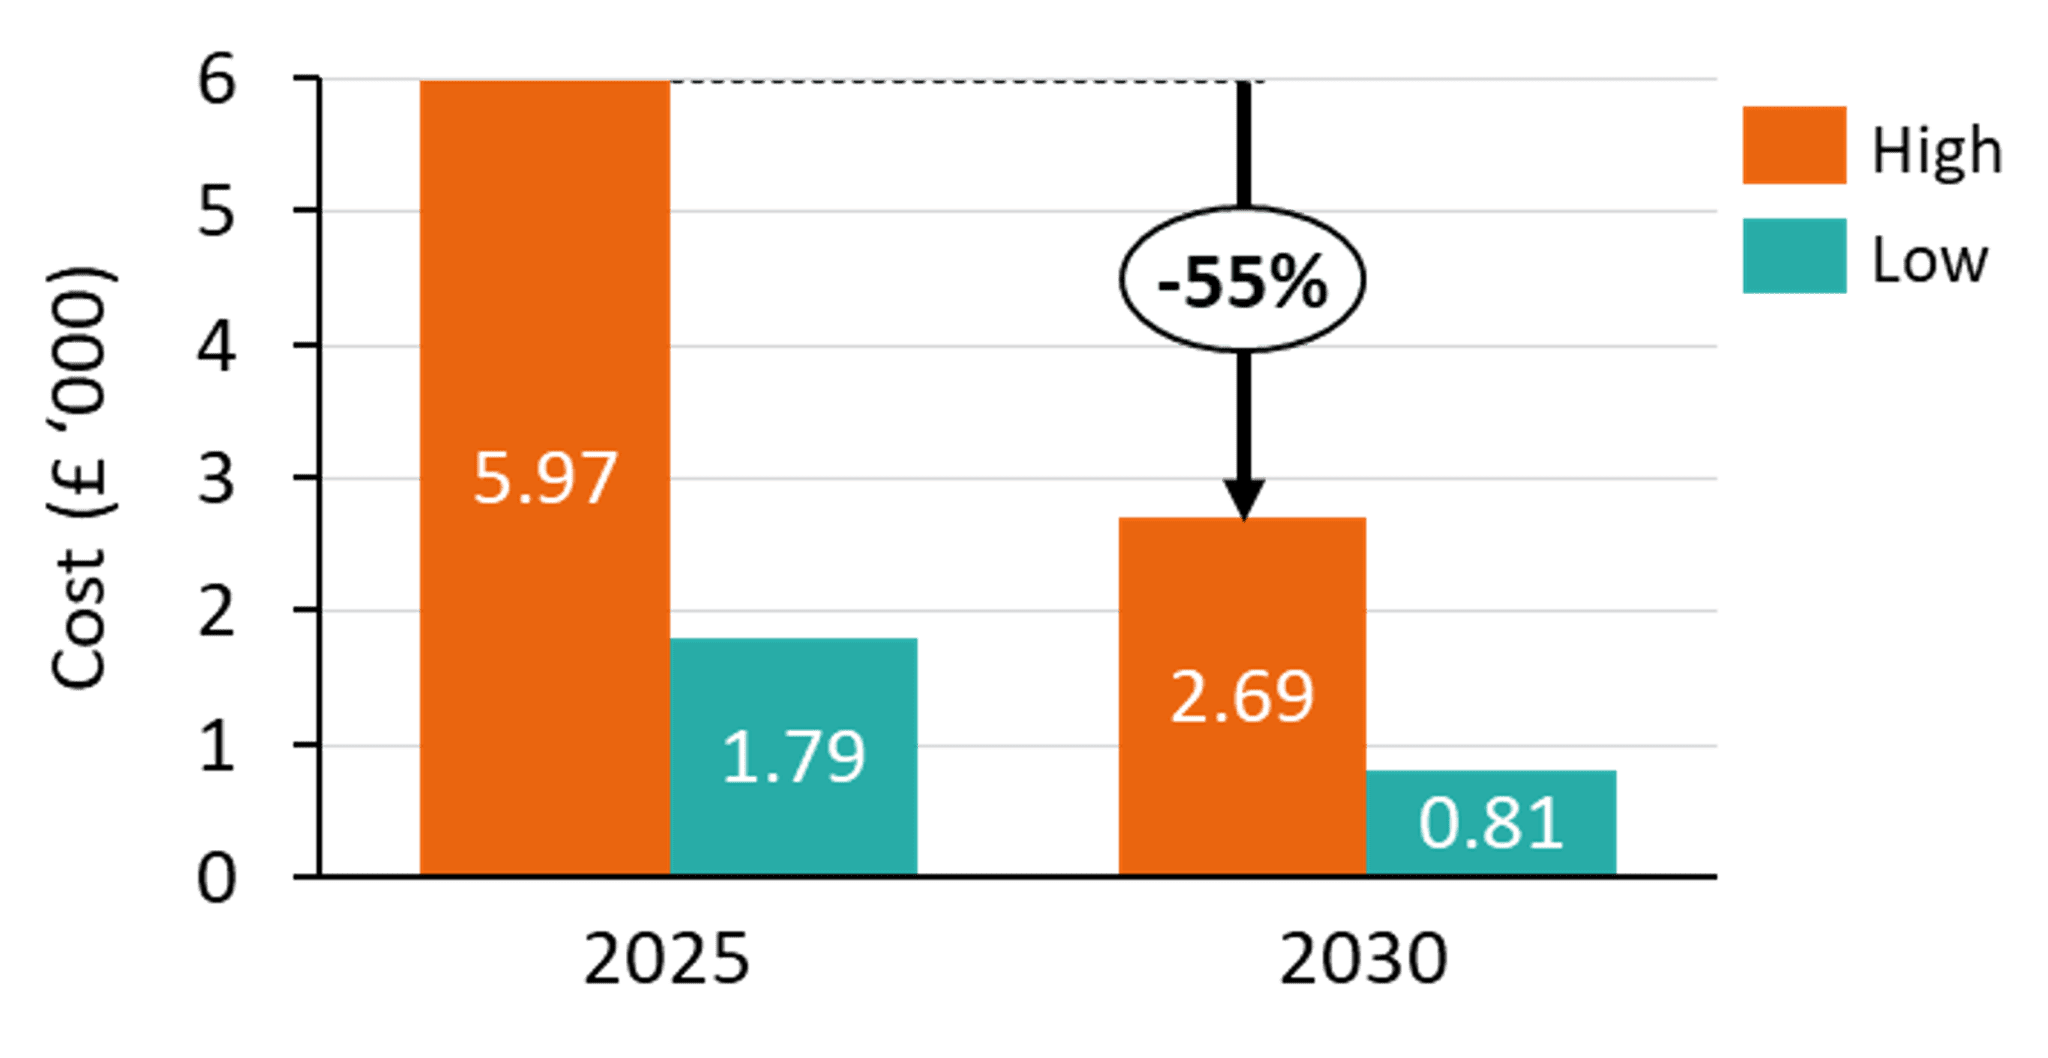 A chart showing the associated costs for hardware and installations for a 22 kW AC charger in 2025 and 2030, respectively. The costs are given in terms the thousands of pounds. In 2025, the high cost is £5,970 and the low cost is £1,790. In 2030, the high cost is £2,690 and the low cost is £810. 